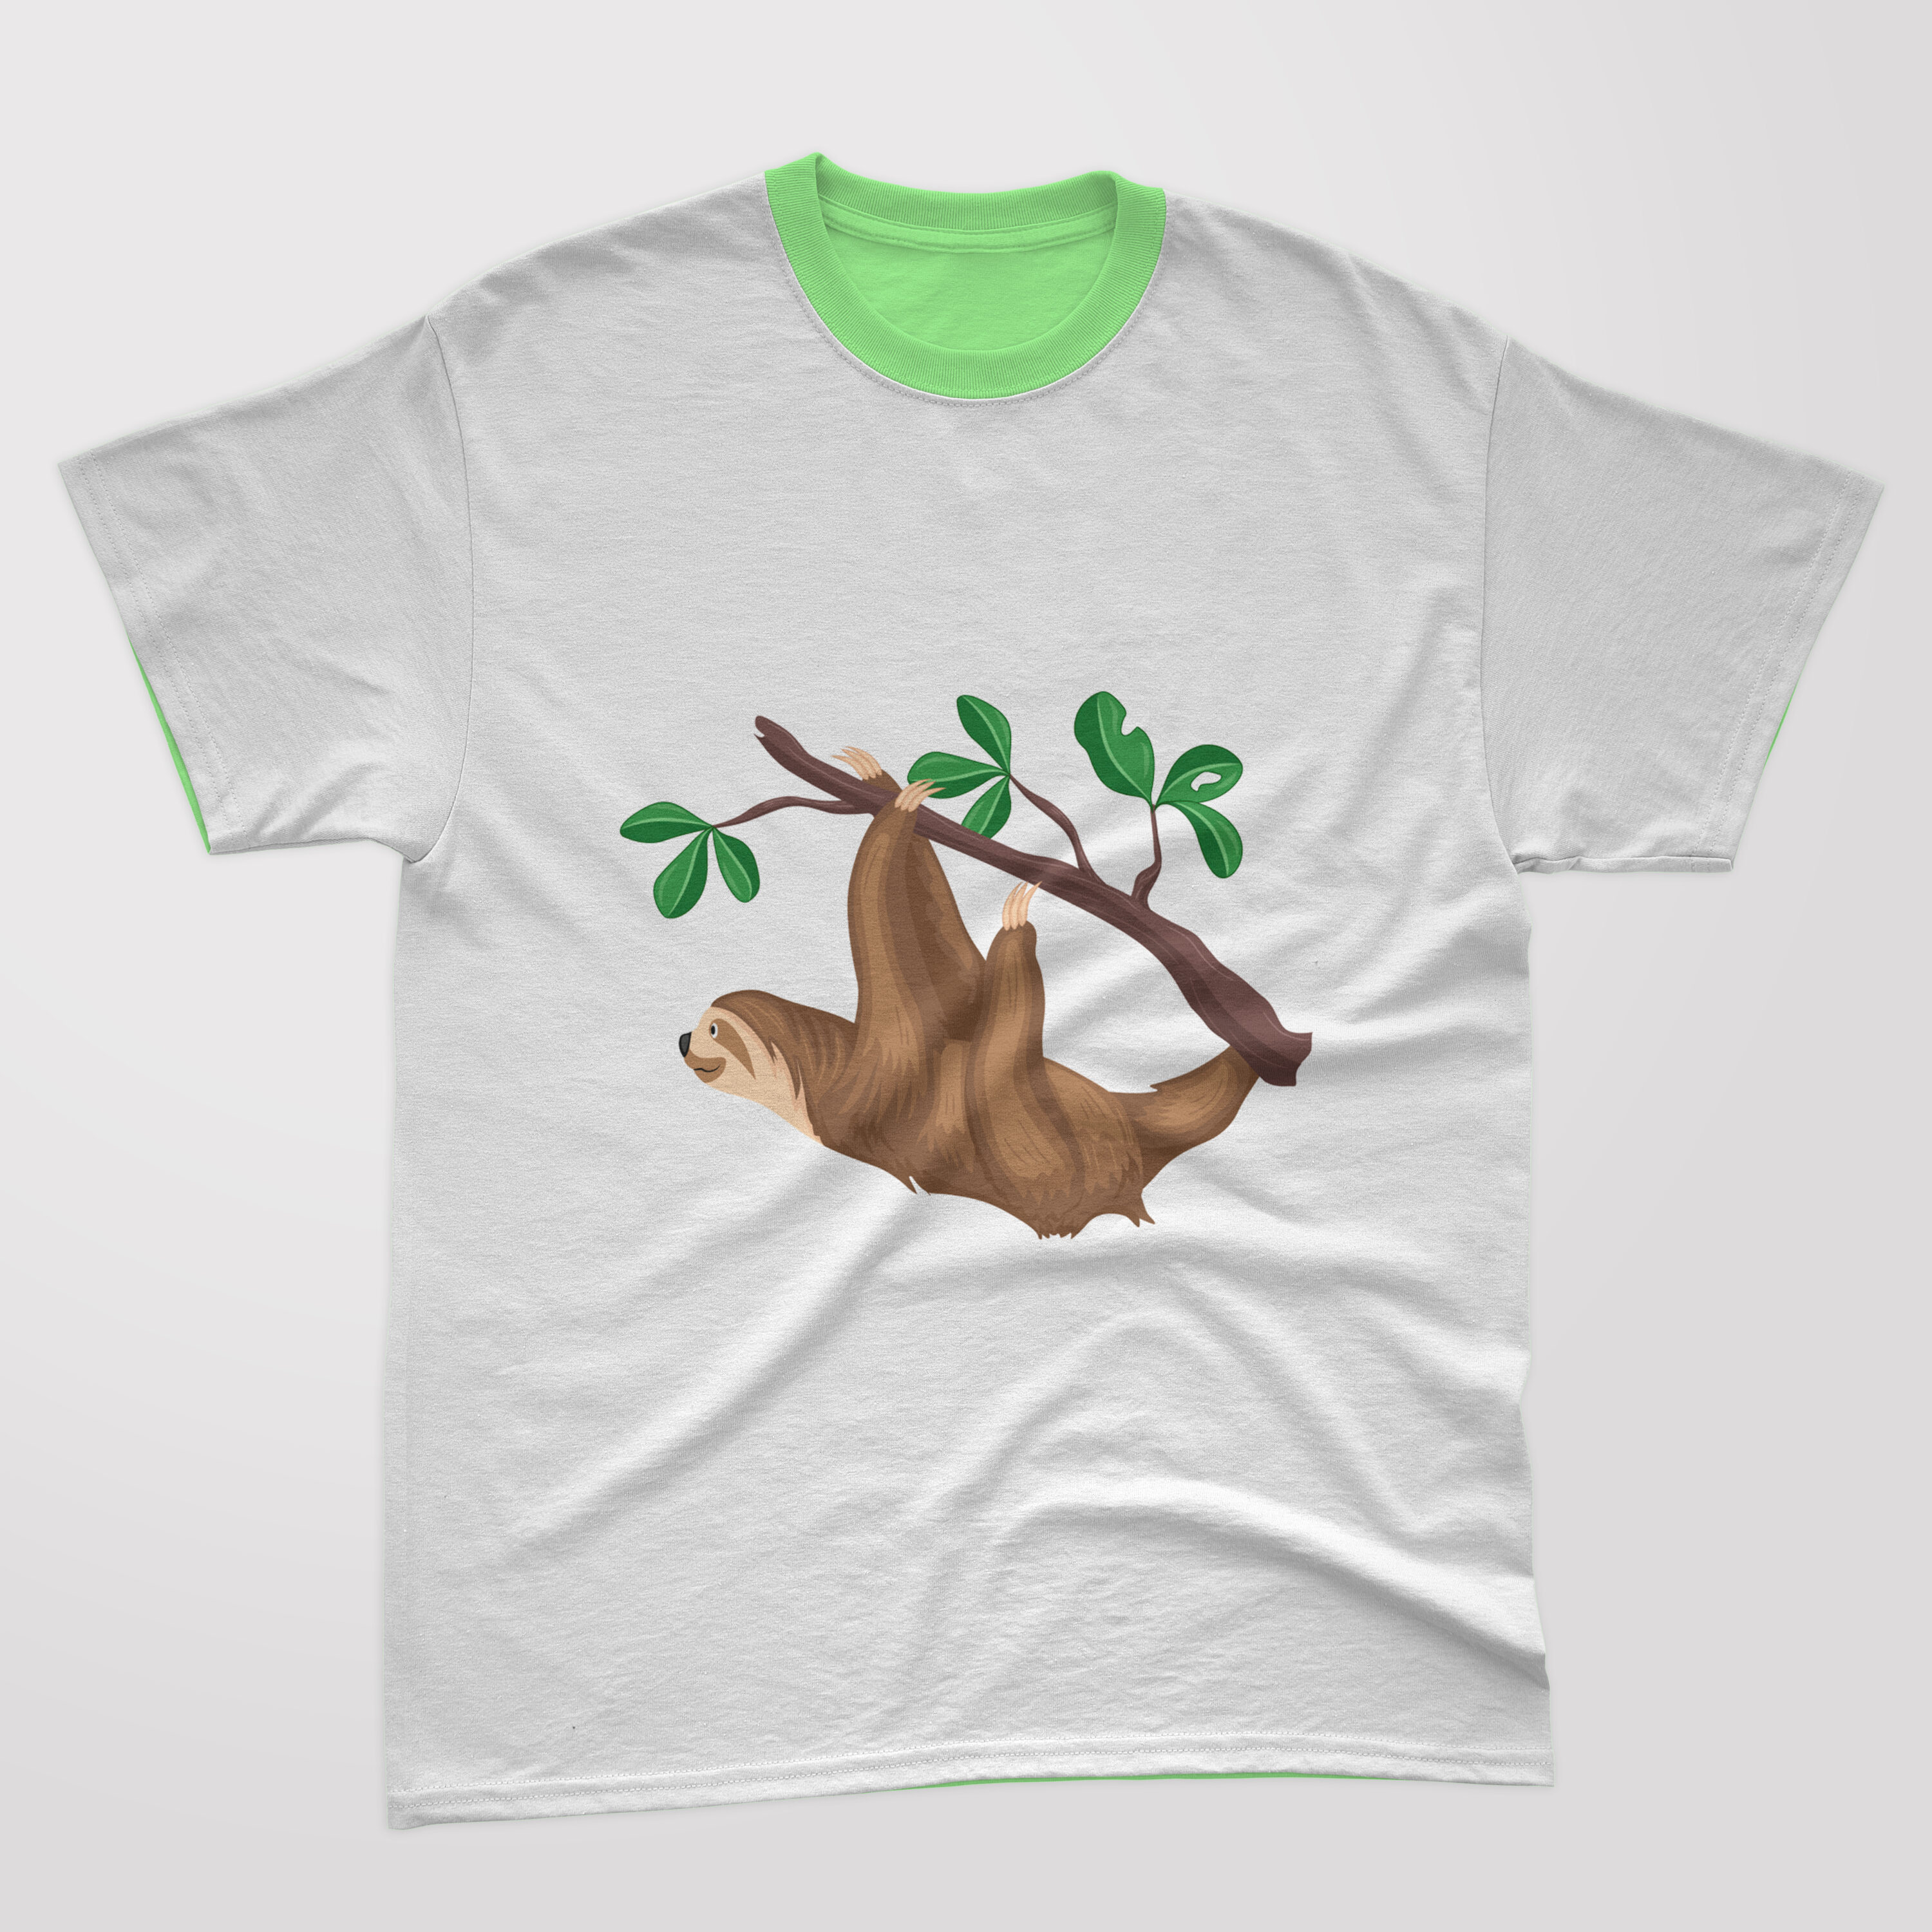 T-shirt image with irresistible sloth print on wood.